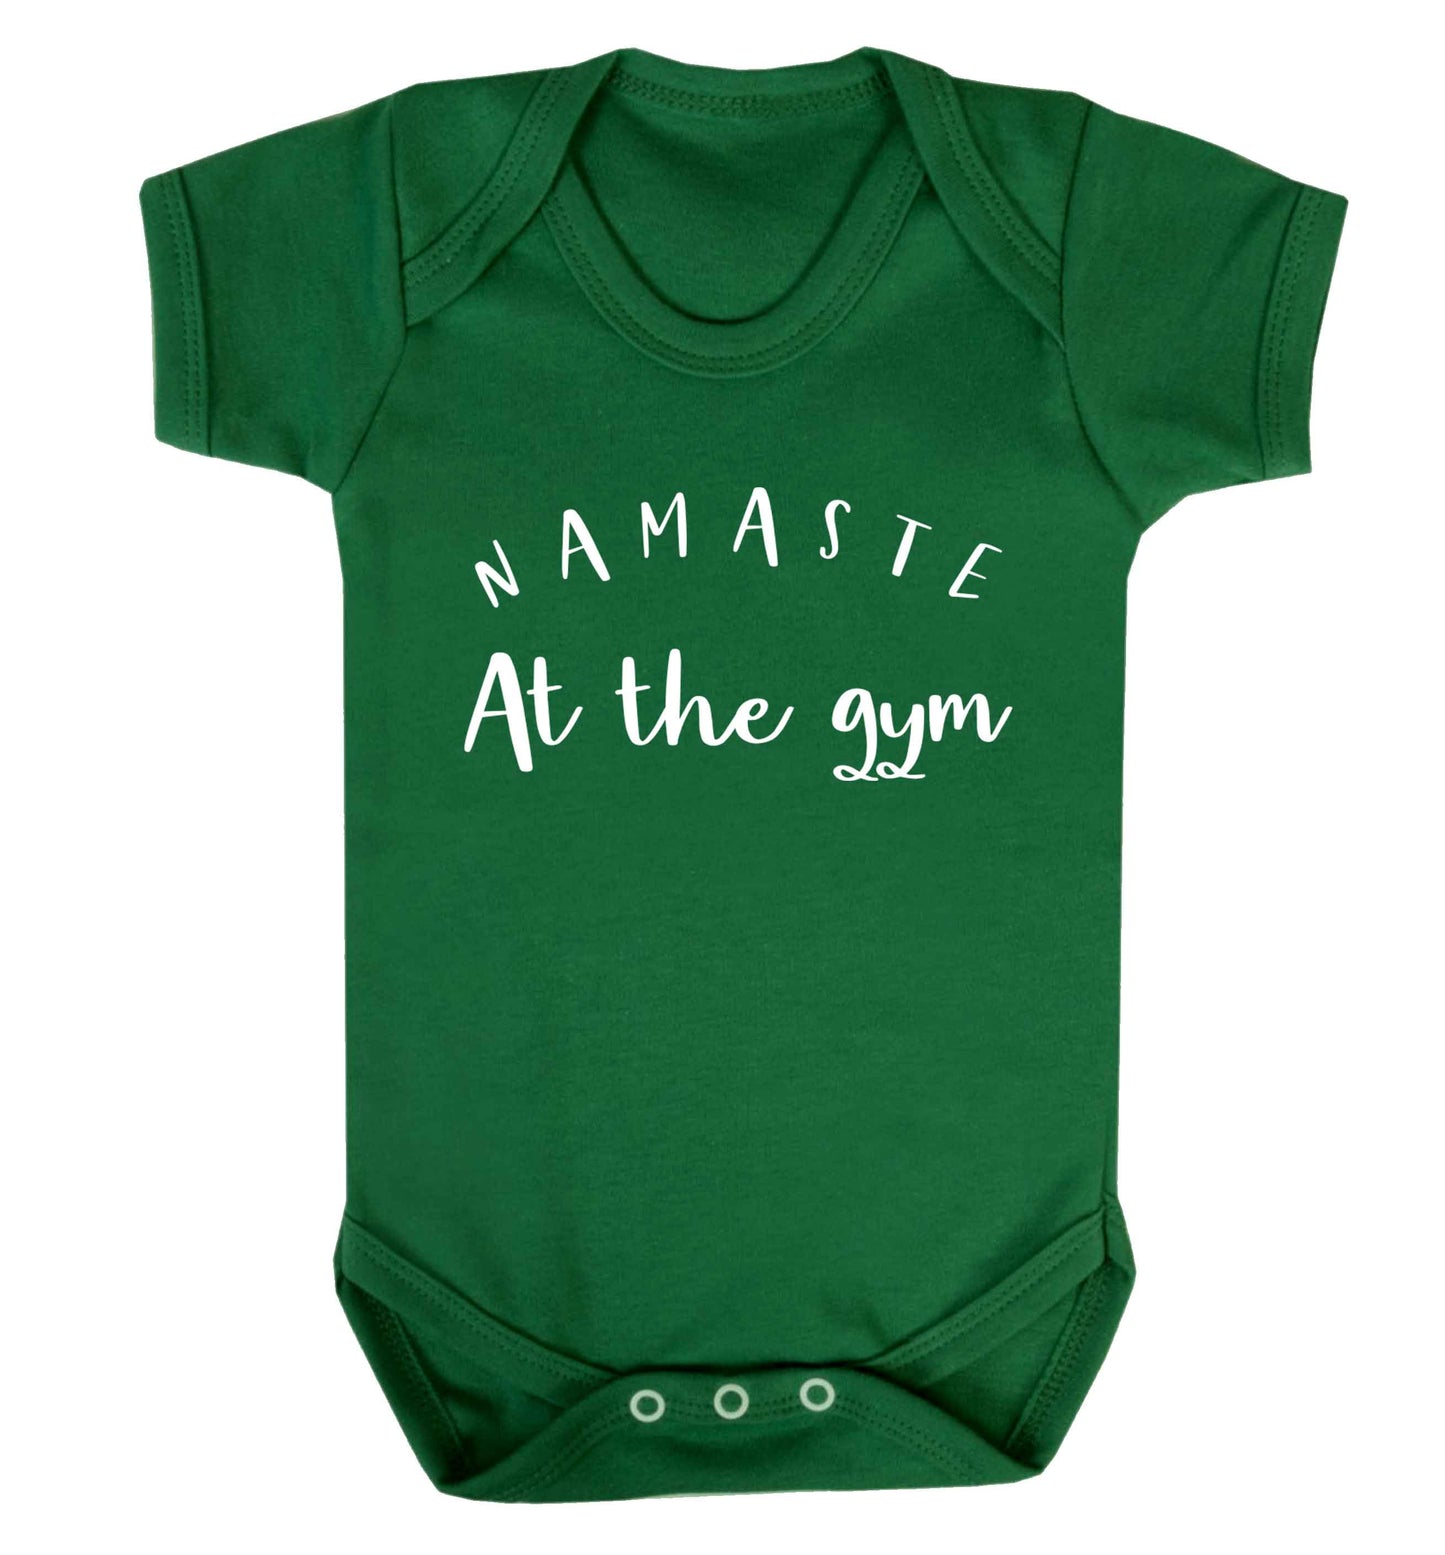 Namaste at the gym Baby Vest green 18-24 months